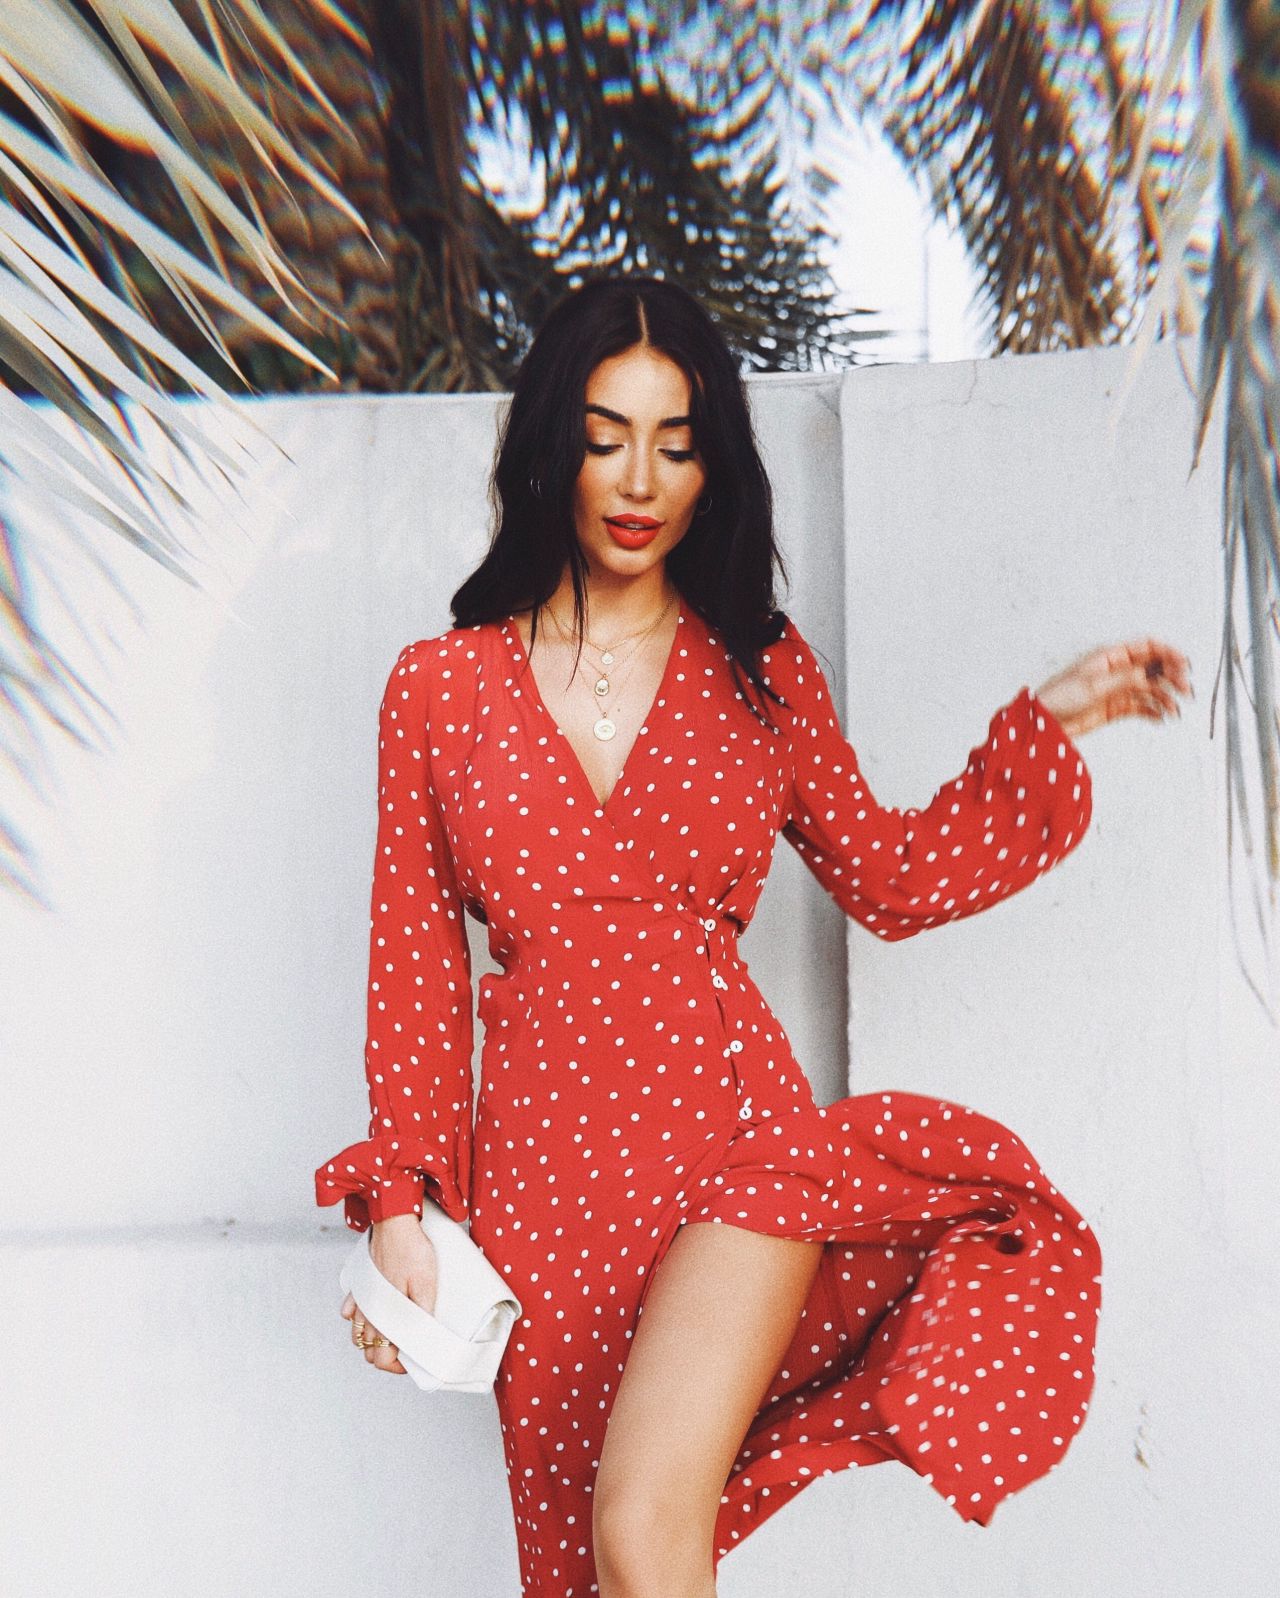 With <a href="https://www.instagram.com/themayaahmad/?hl=en" target="_blank" target="_blank">1.1 million Instagram</a> followers and counting, Maya Ahmad is without a doubt one of the region's biggest influencers. The Lebanese beauty and lifestyle blogger, based mostly in Dubai, regularly collaborates with brands such as MAC Cosmetics, Dior and Guerlain.<br />